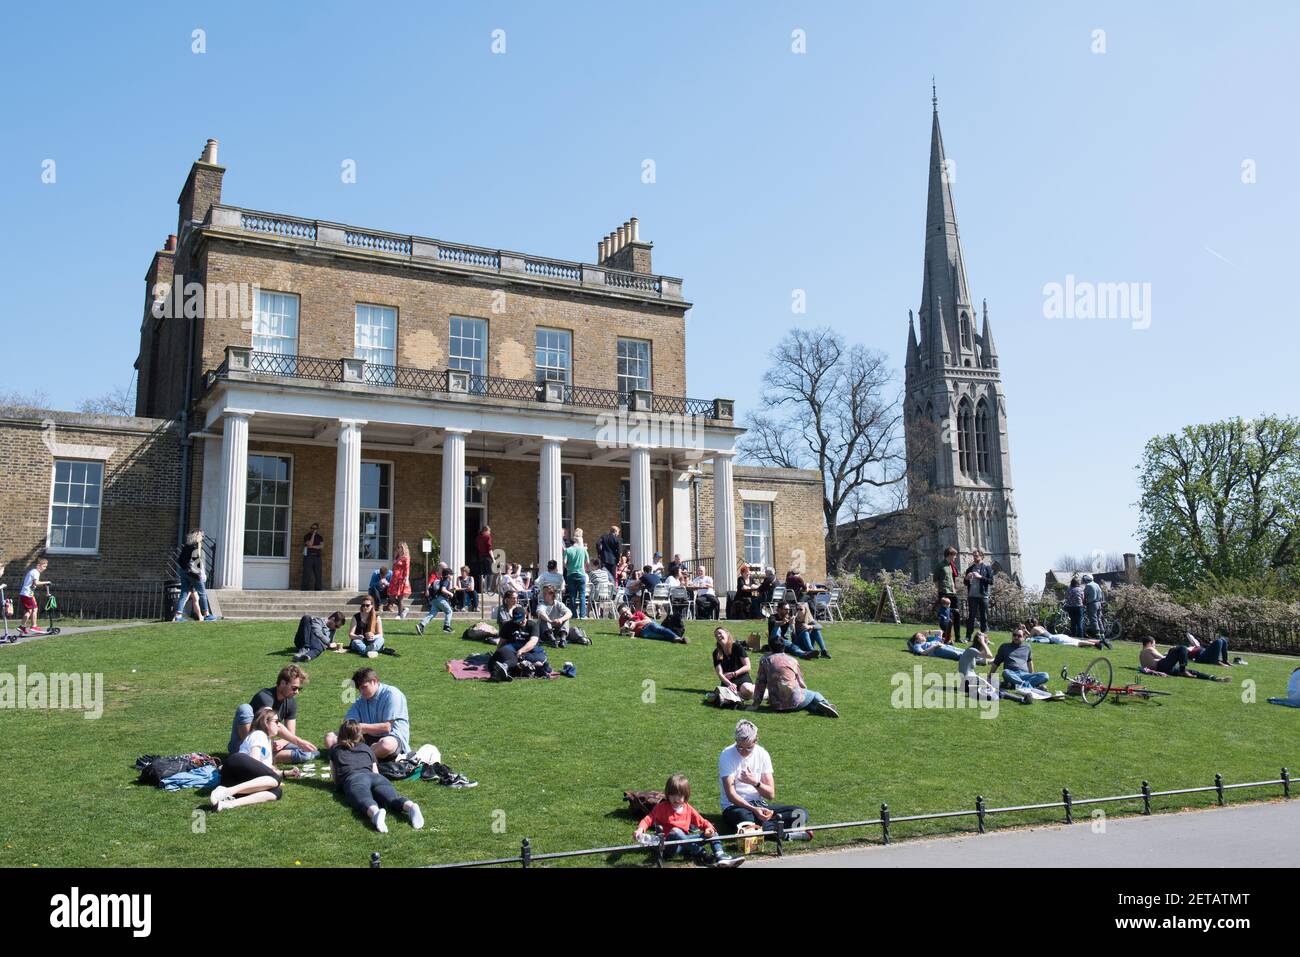 Clissold House or Mansion with people sitting in front and St. Mary's Church spire to right Clissold Park, Stoke Newington London Borough of Hackney Stock Photo